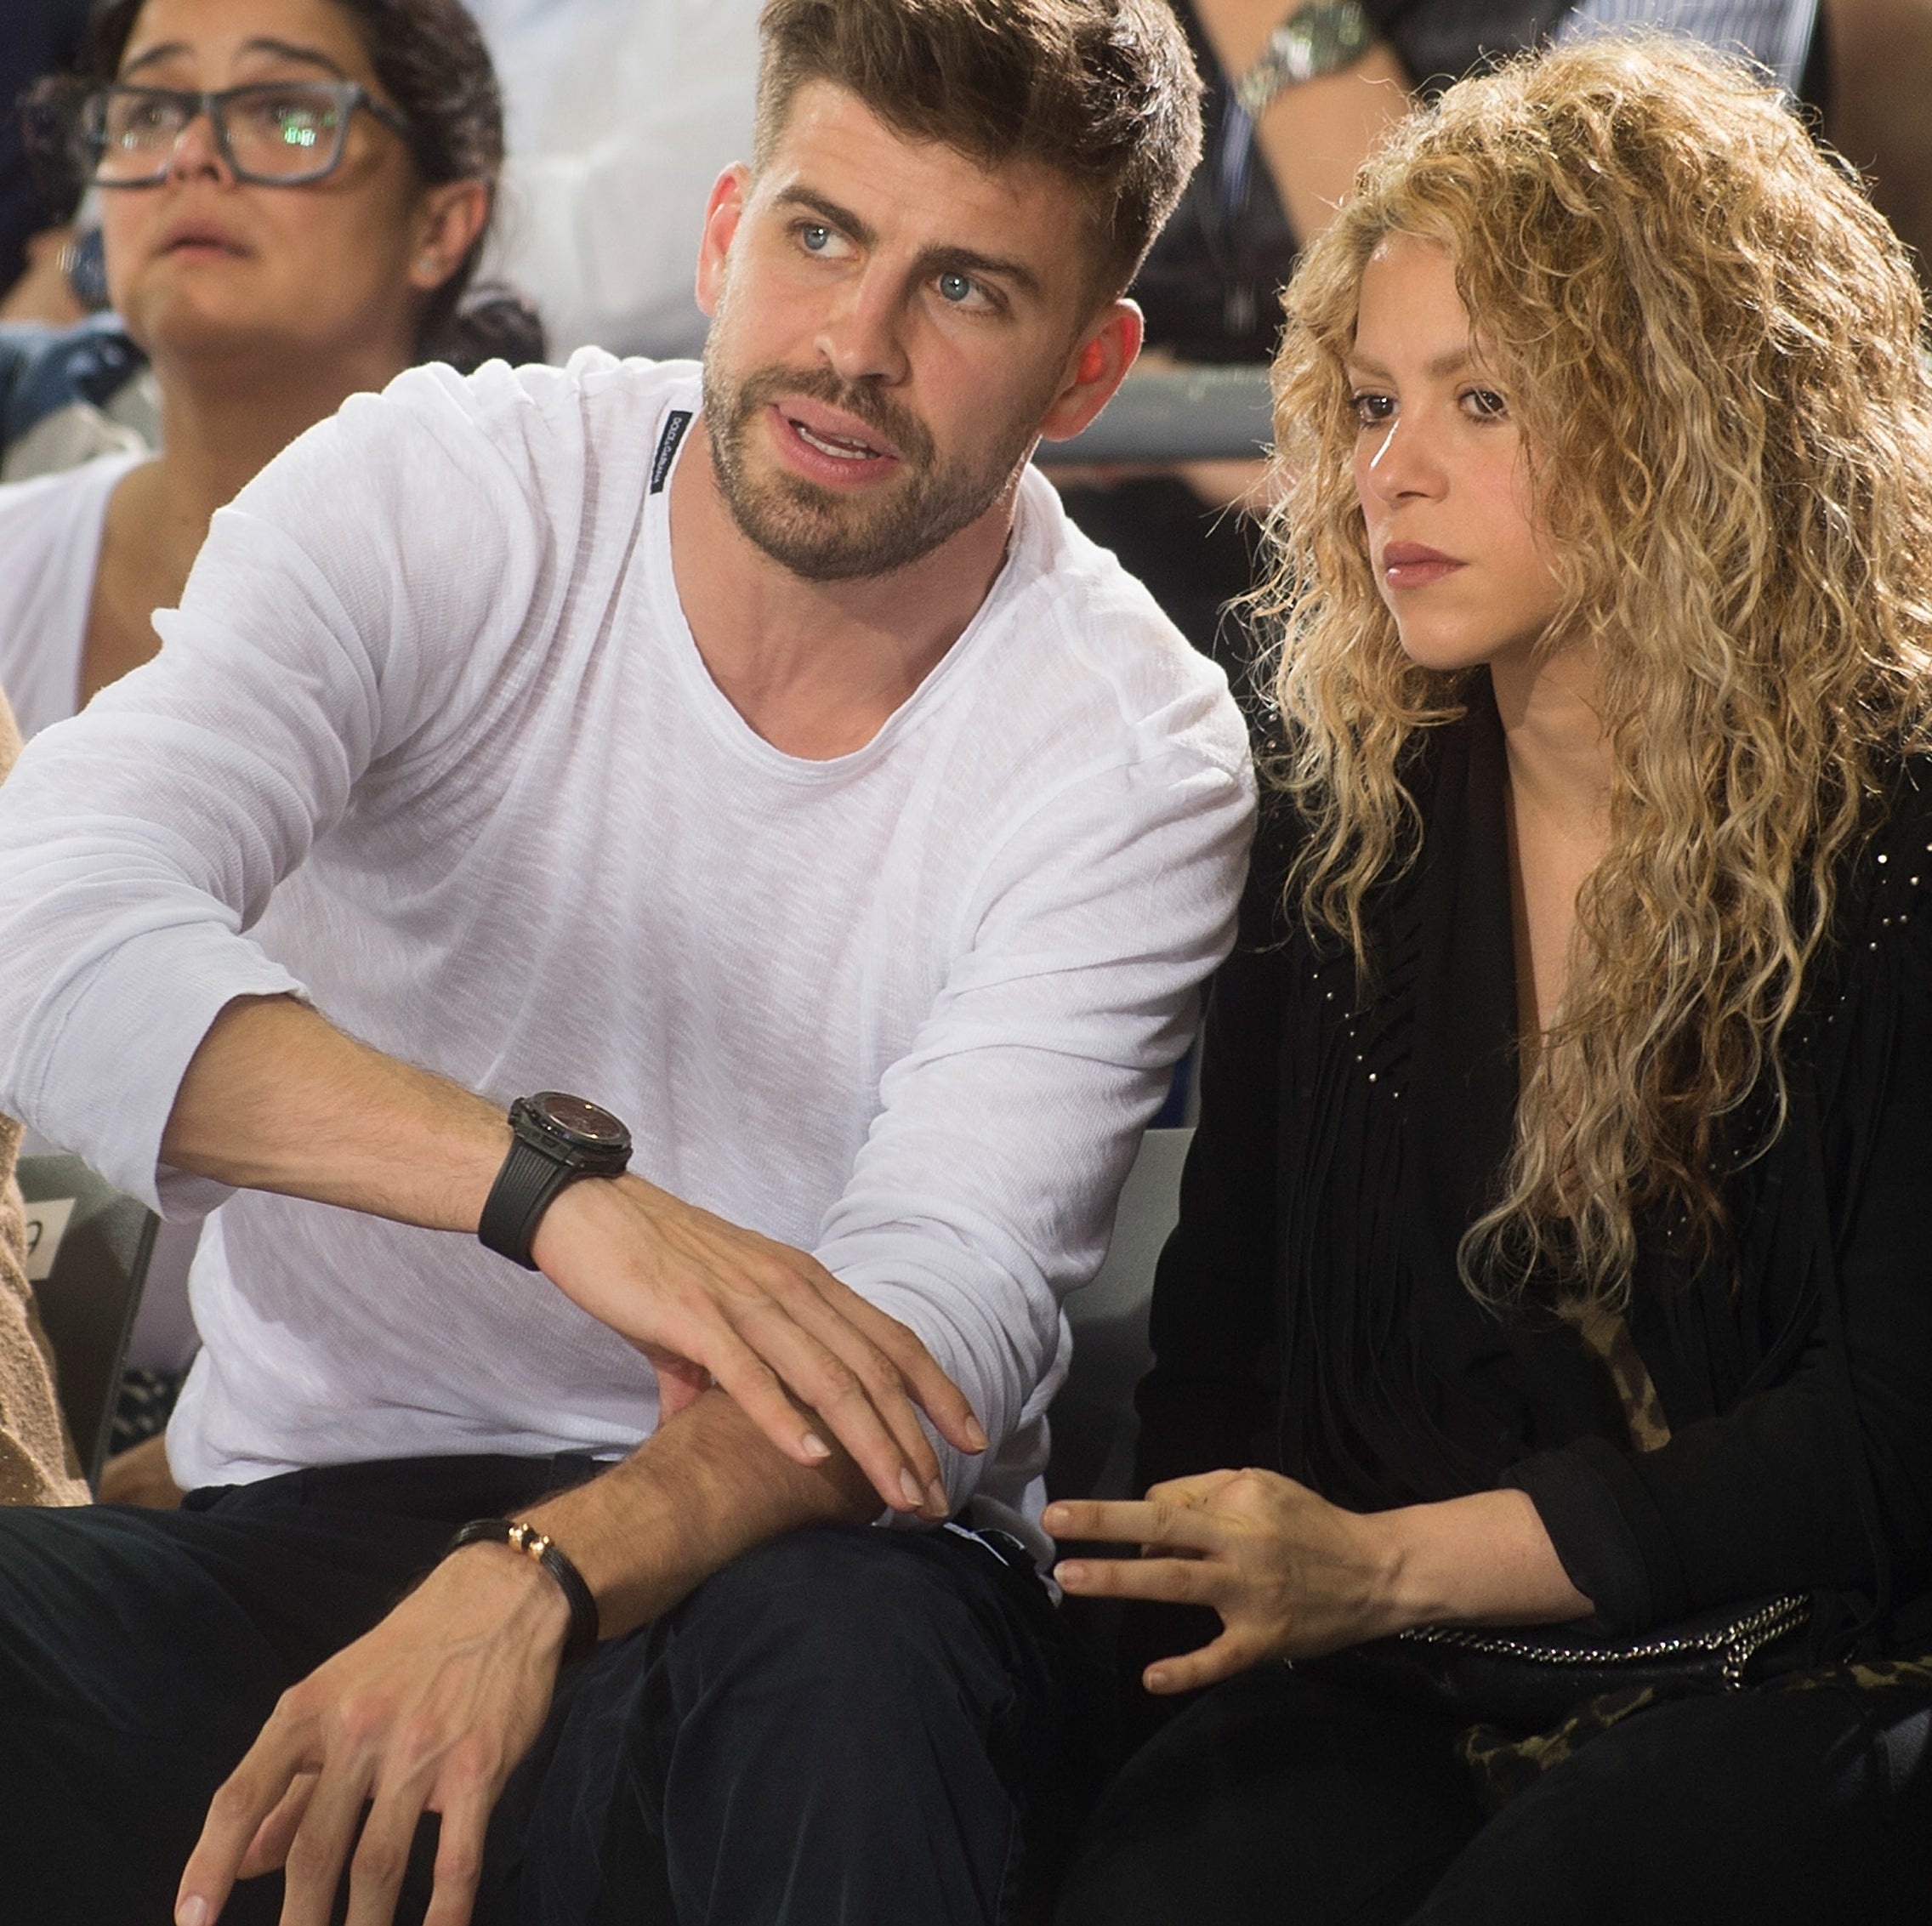 Shakira and Gerard sitting next to each other